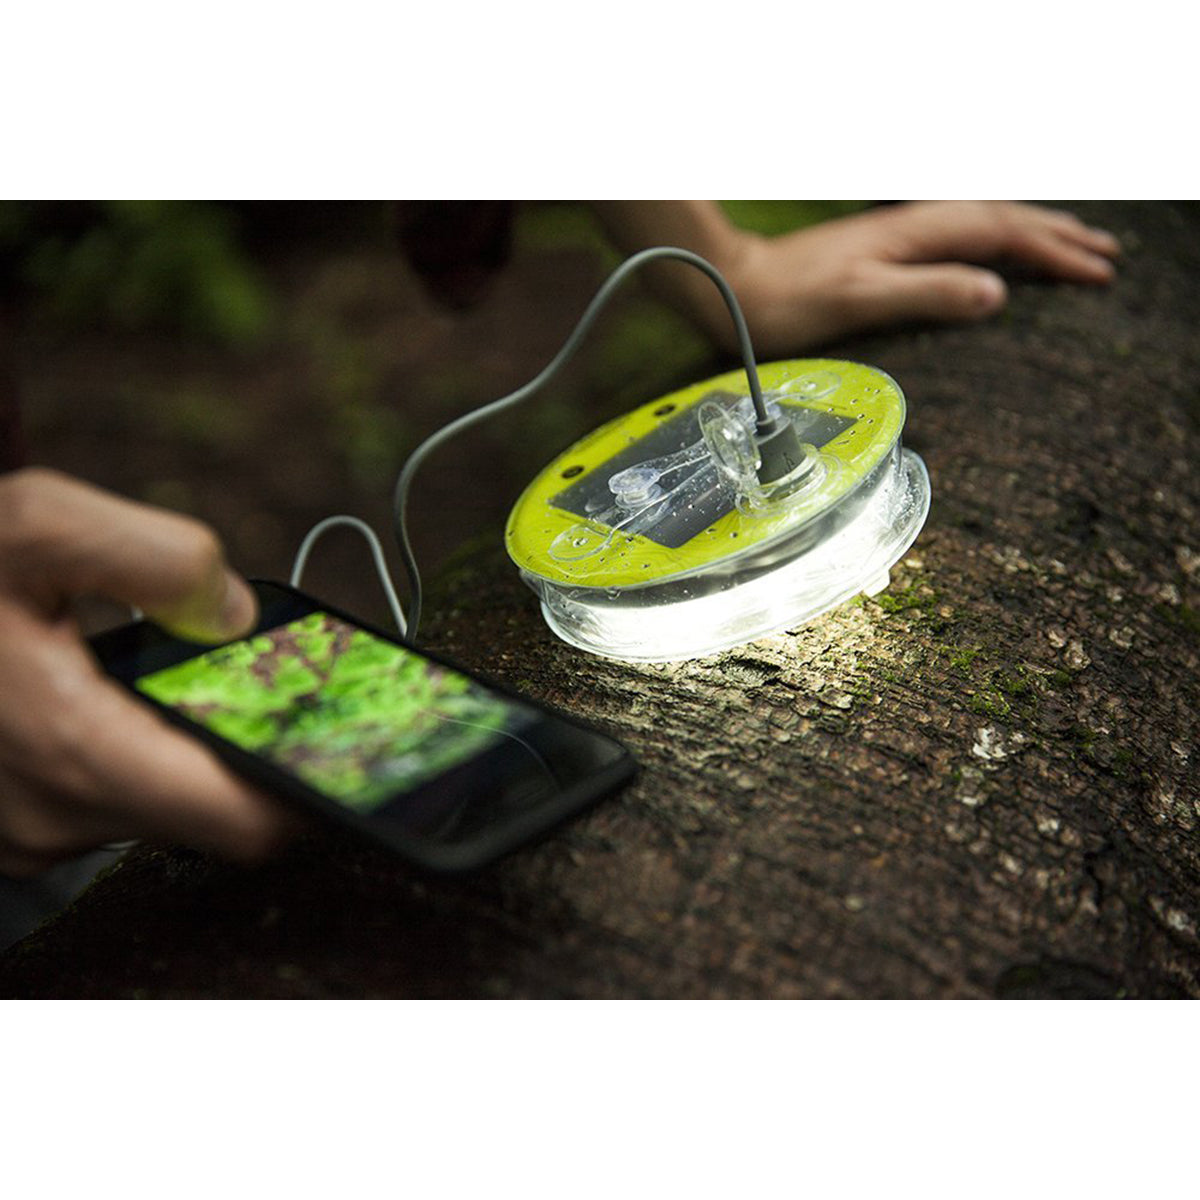 MPOWERD Luci Pro Outdoor 2.0 Waterproof Inflatable Solar Light w/ Mobile Charger MPOWERD